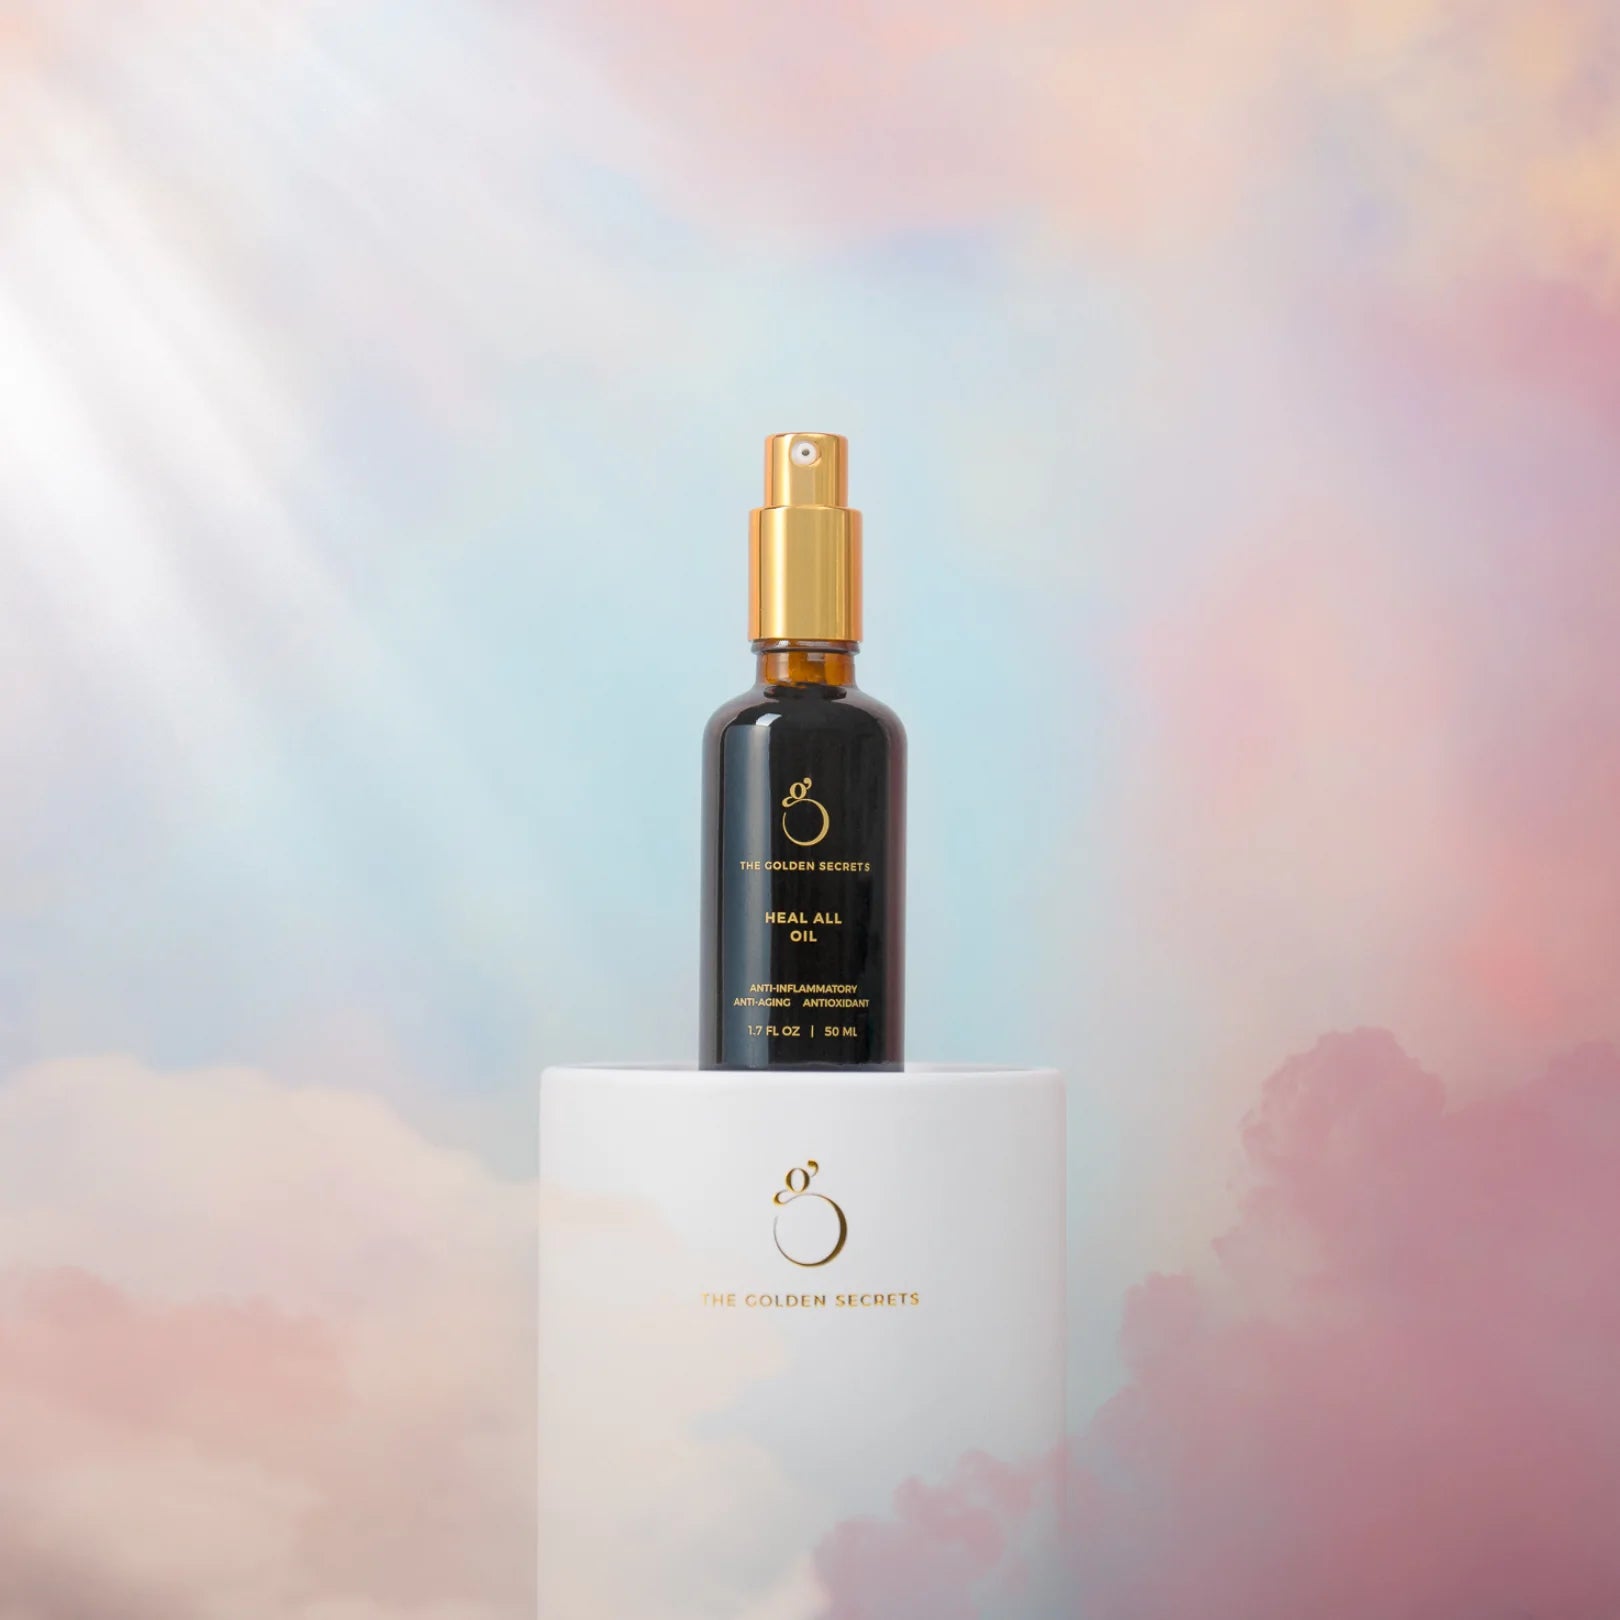 HEAL ALL OIL by: The Golden Secrets